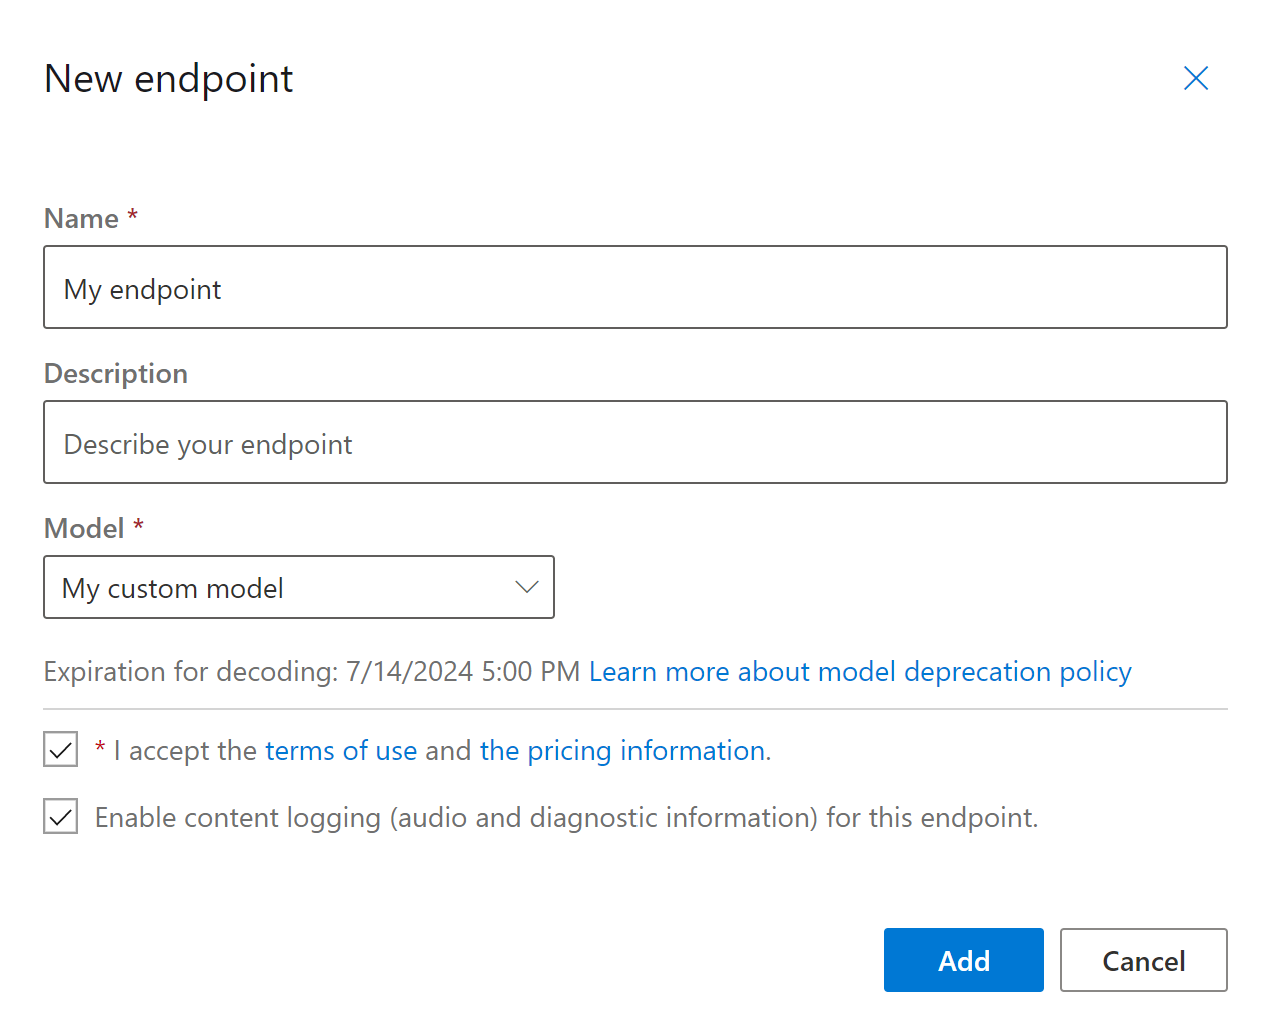 Screenshot of the New endpoint page that shows the checkbox to enable logging.